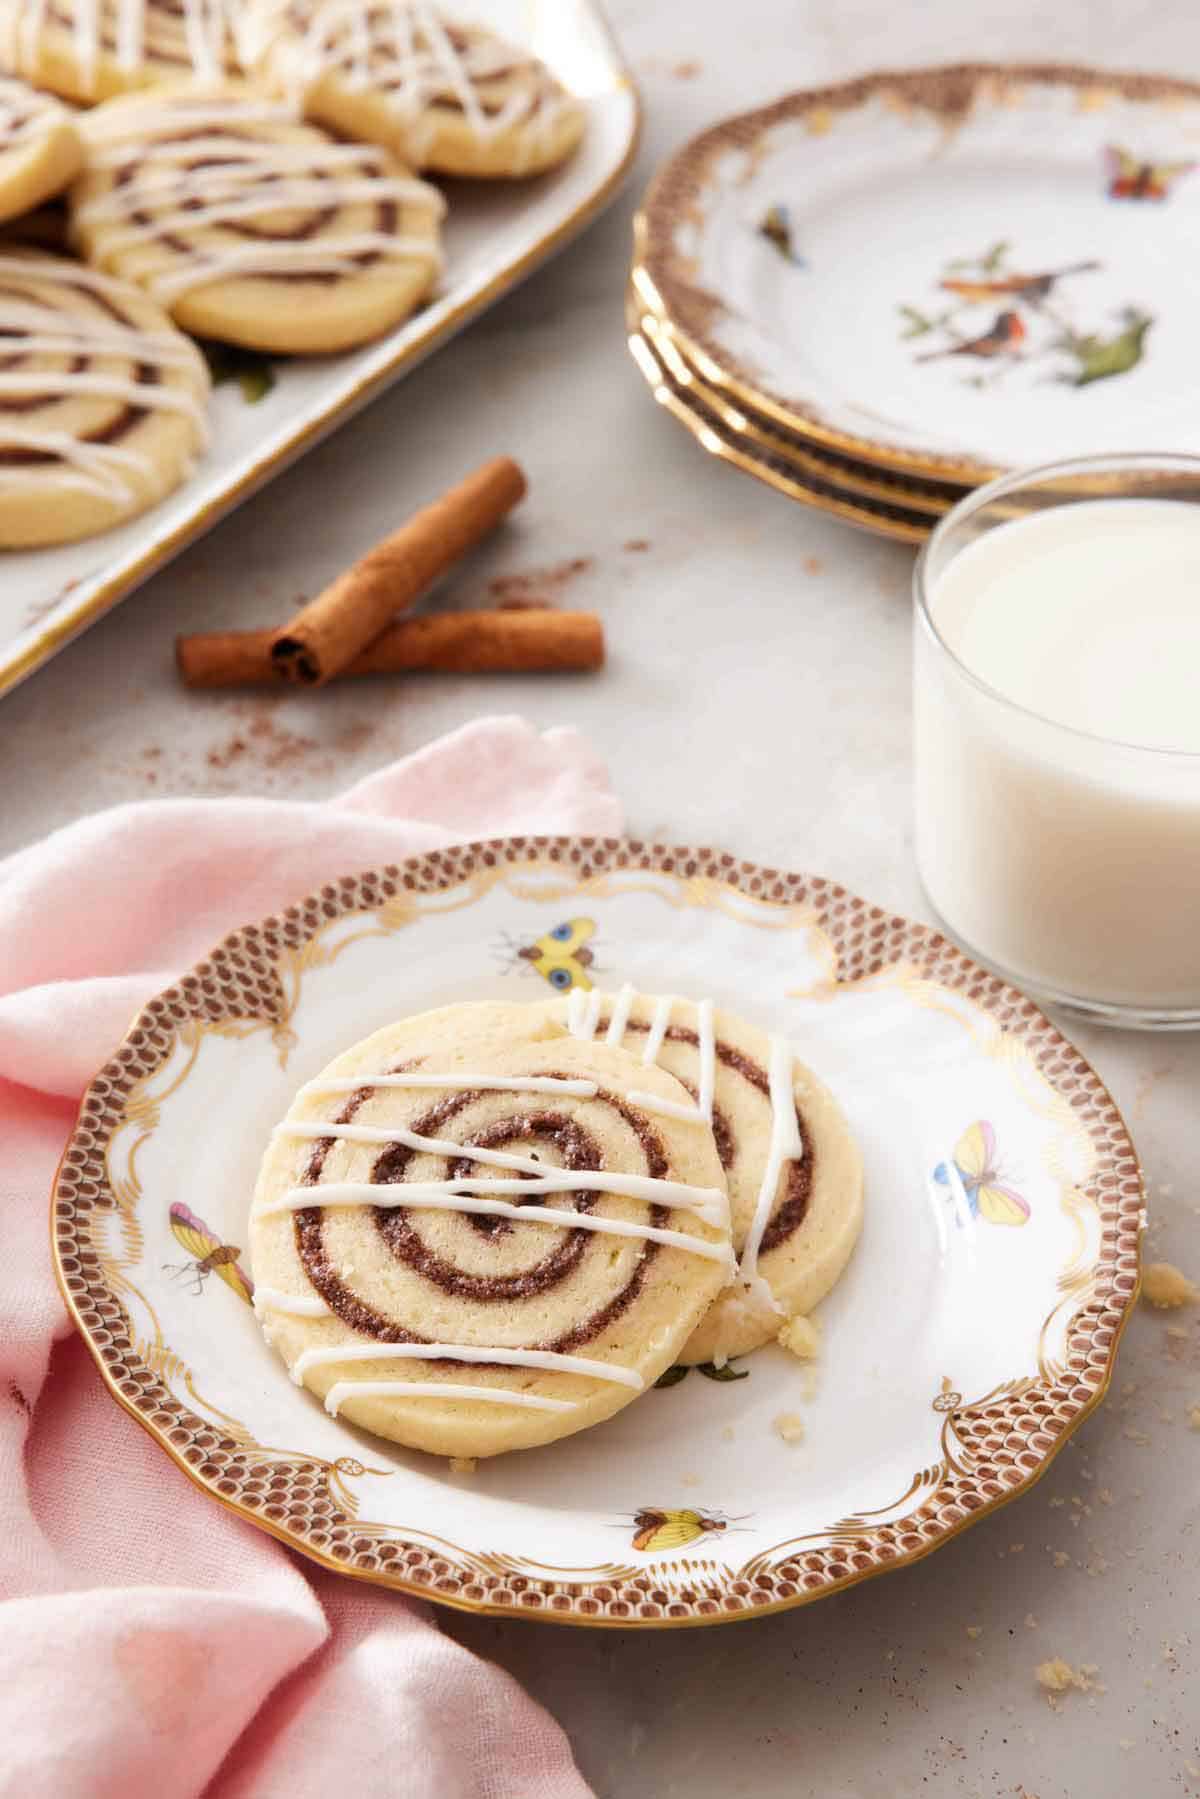 A plate with two cinnamon roll cookies along with a glass of milk, stack of plates, and more cookies in the background.